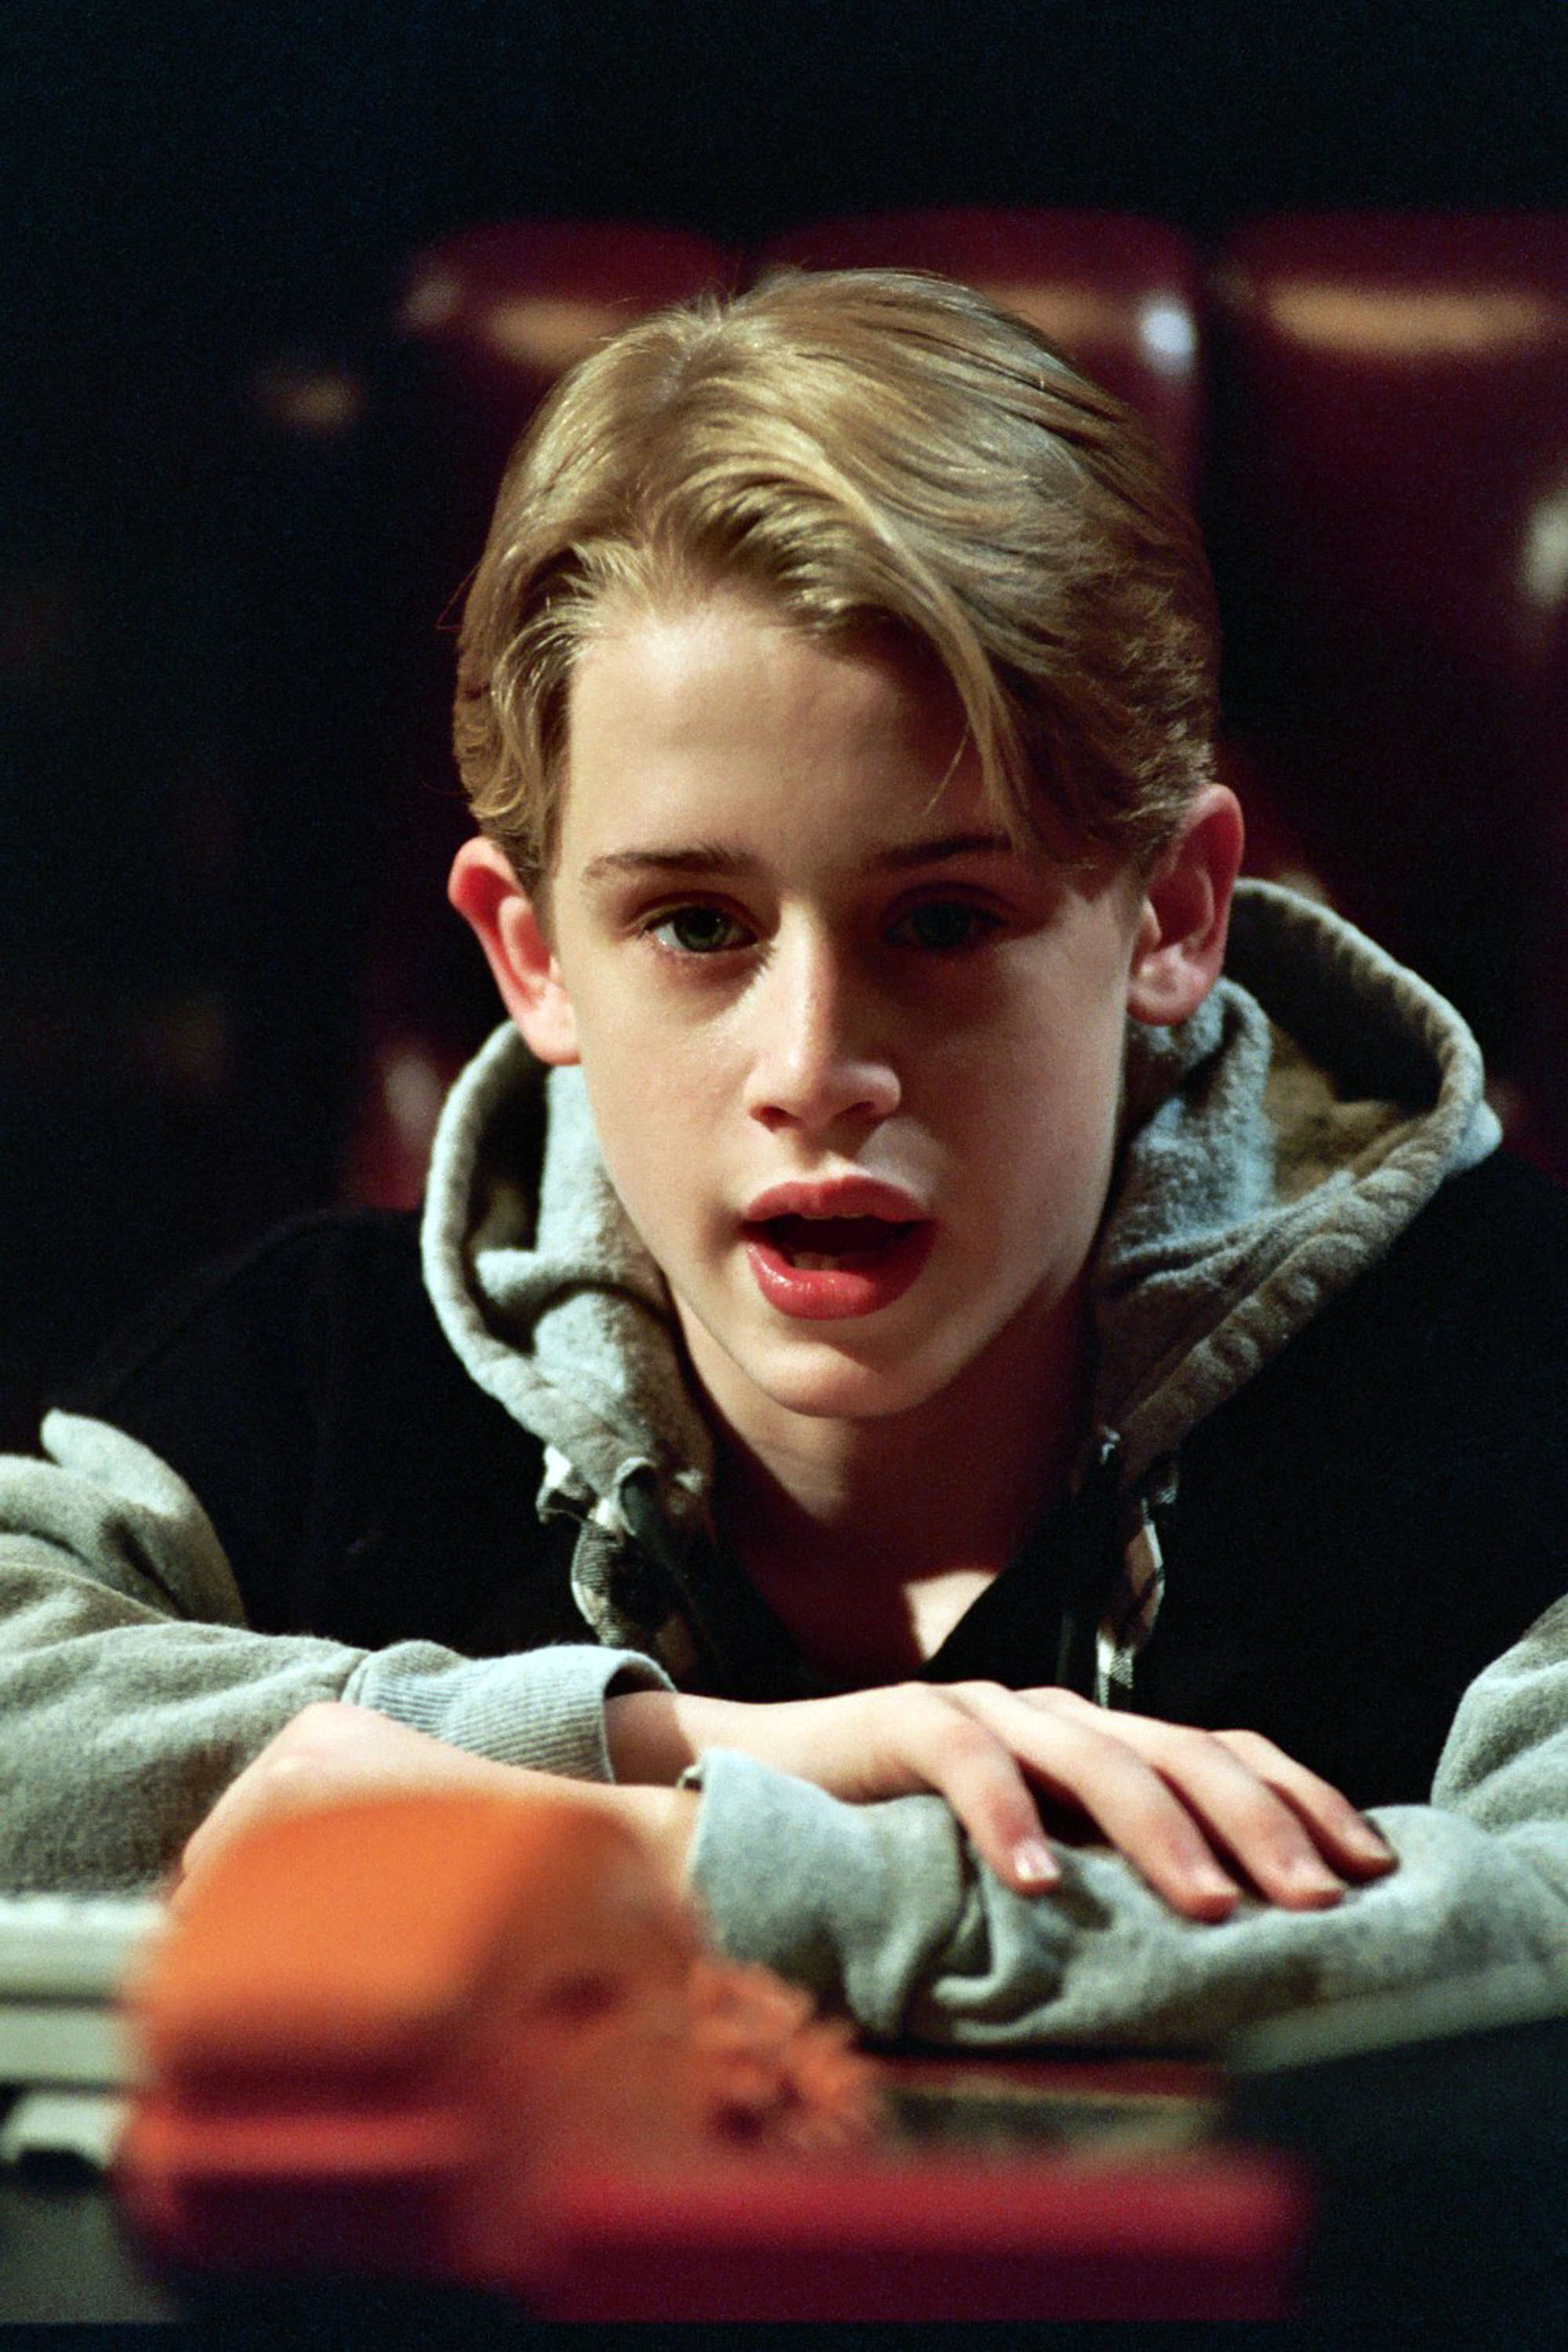 Macaulay Culkin on the set of "Richie Rich" in Los Angeles, California in 1992 | Source: Getty Images